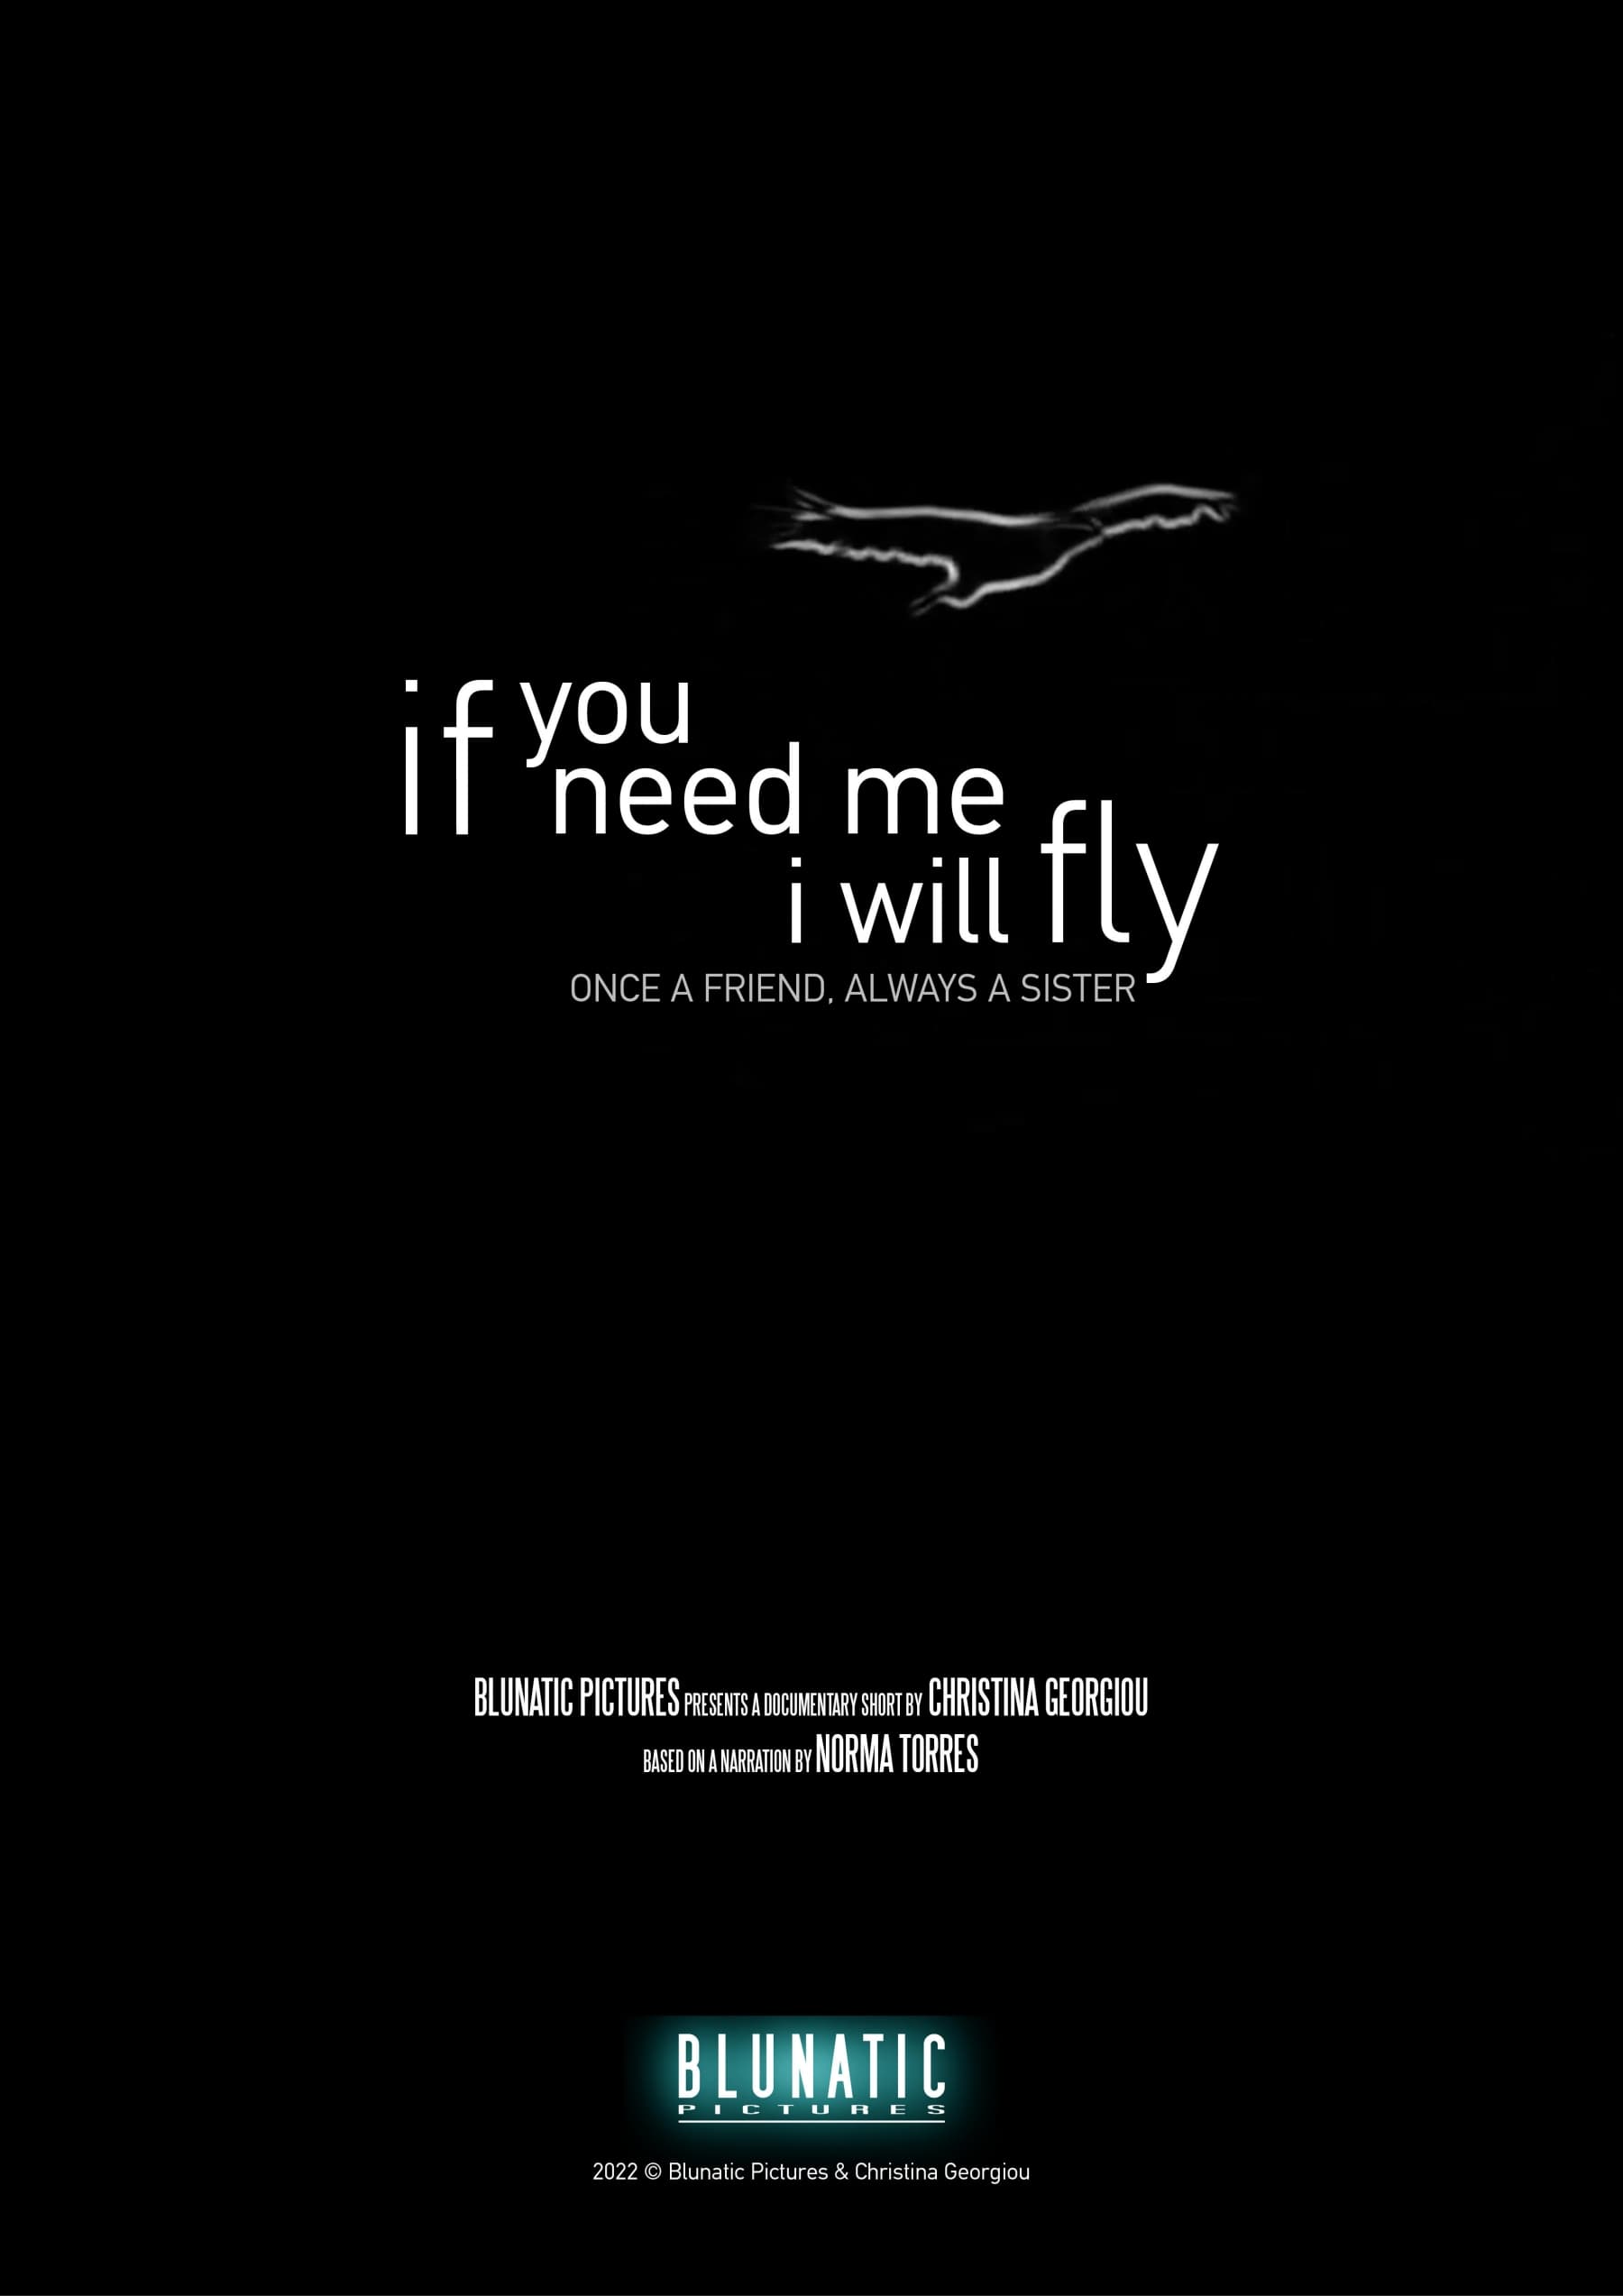 If You Need Me, I Will Fly